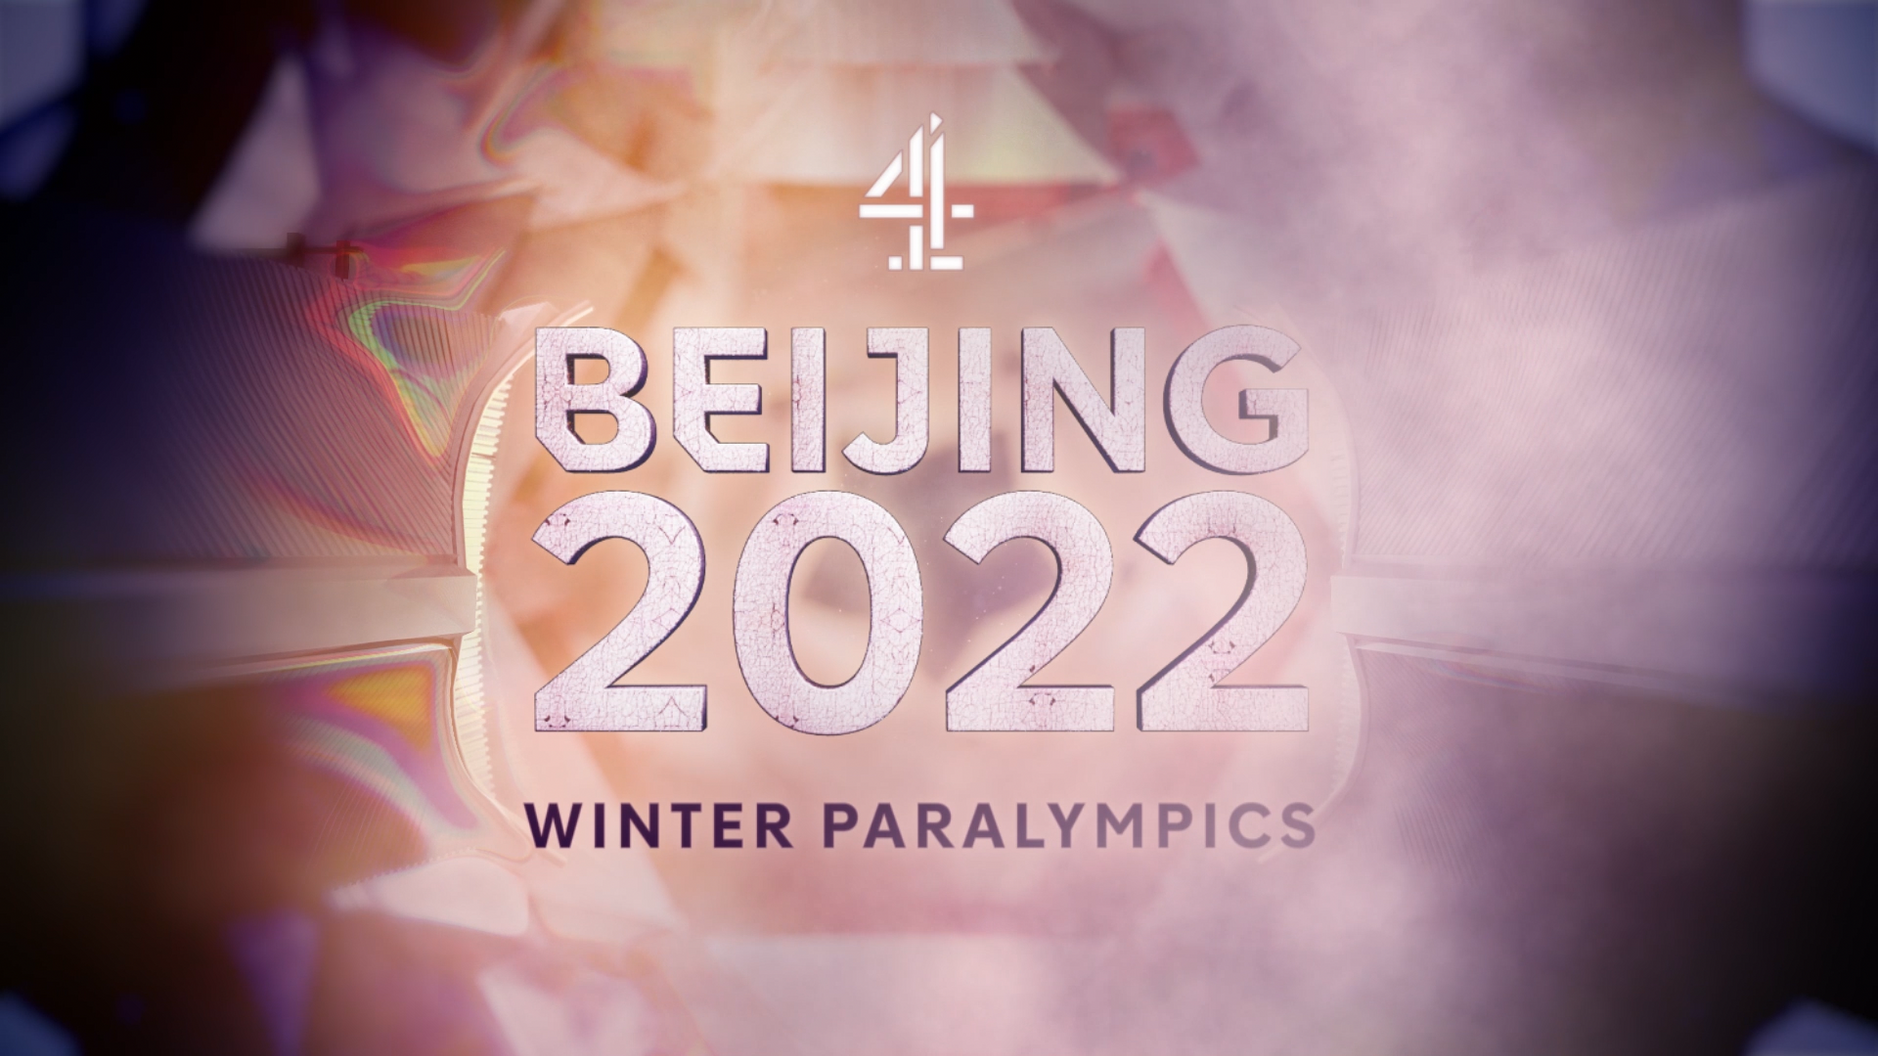 Winter Paralympic 2022 Titles